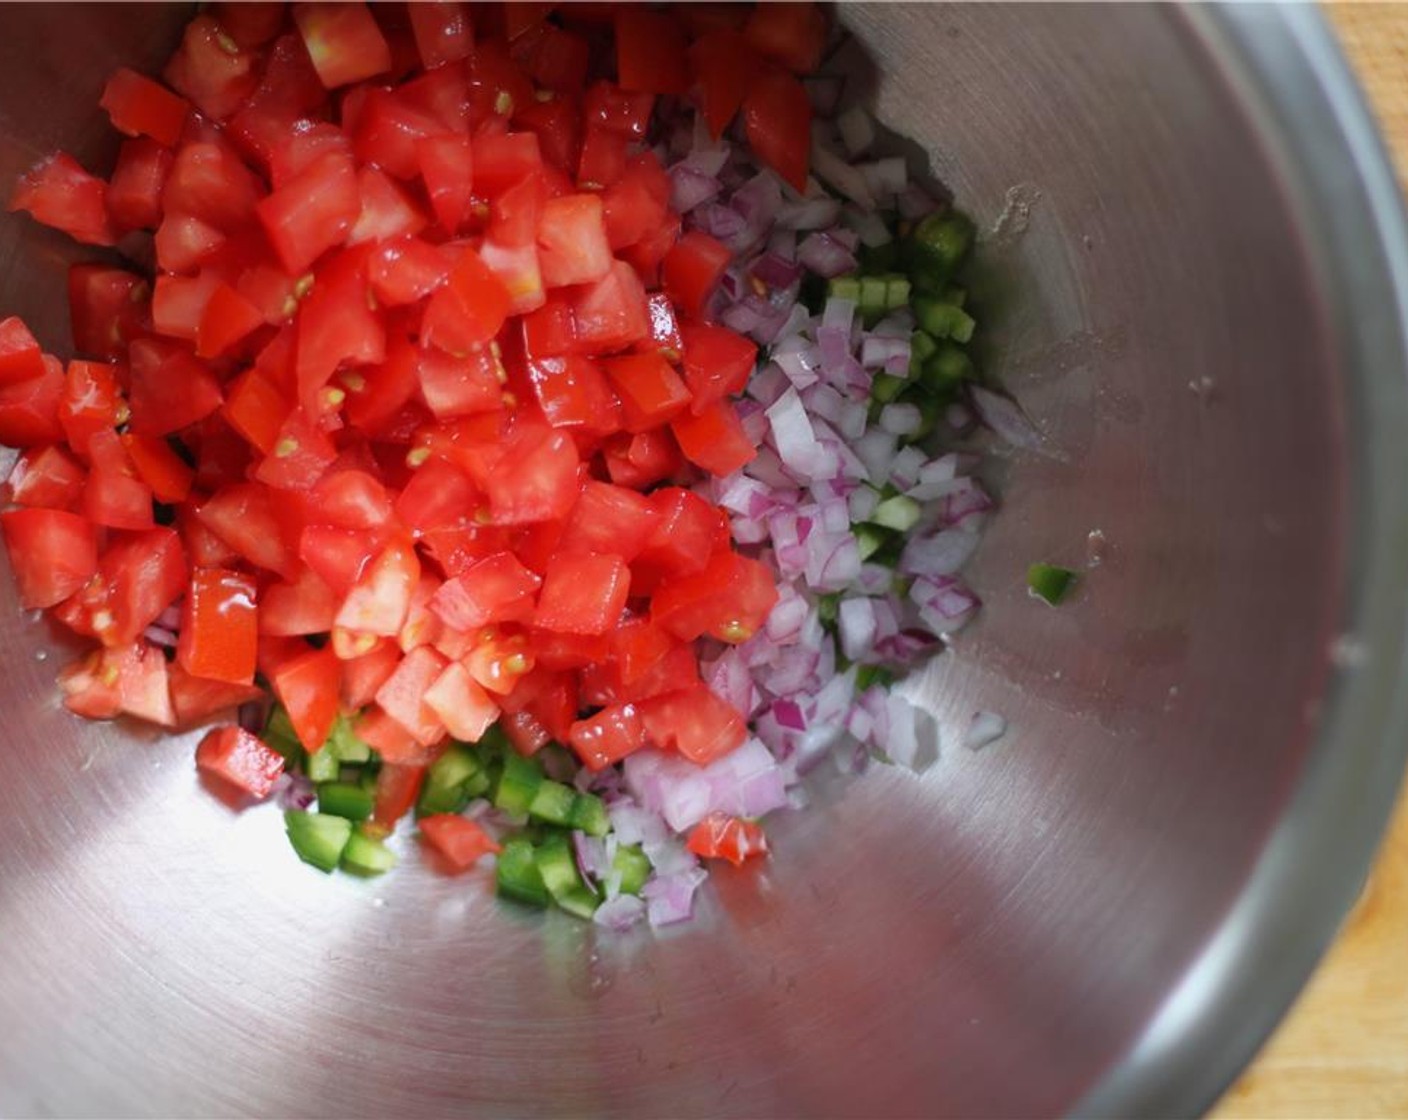 step 3 While the corn roasts, prep the vegetables. Mix the Jalapeño Pepper (1), Red Onion (1/2), Roma Tomato (1), and Red Chili Pepper (1/4 cup). Add the Fresh Cilantro (1/4 cup).